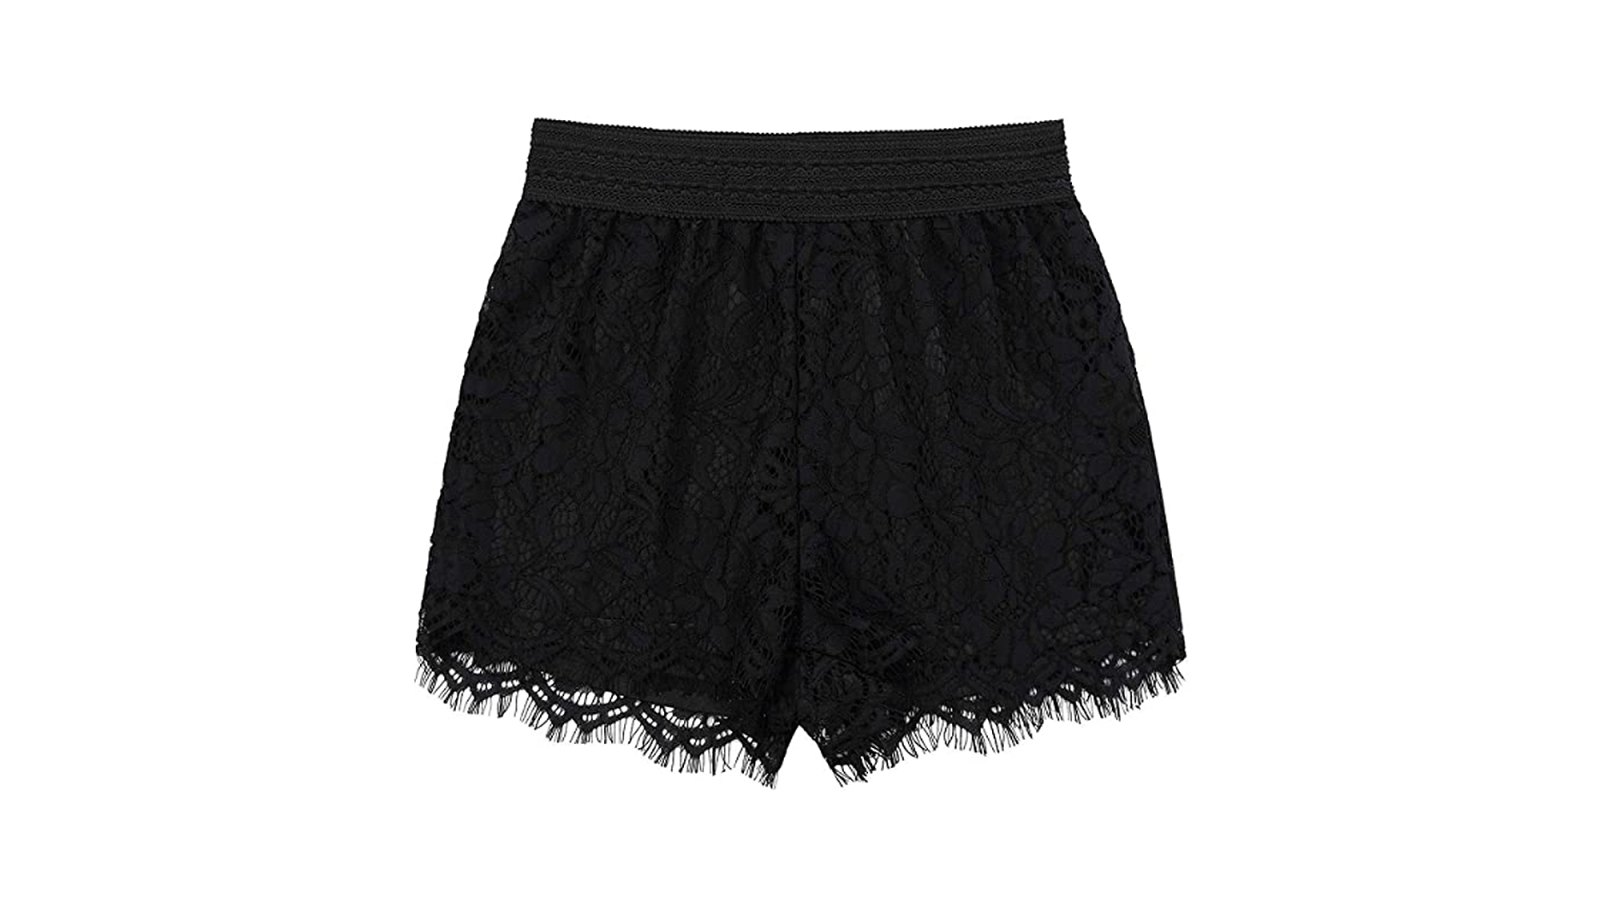 KGYA Women's Sexy Elastic High Waisted Crochet Lace Shorts